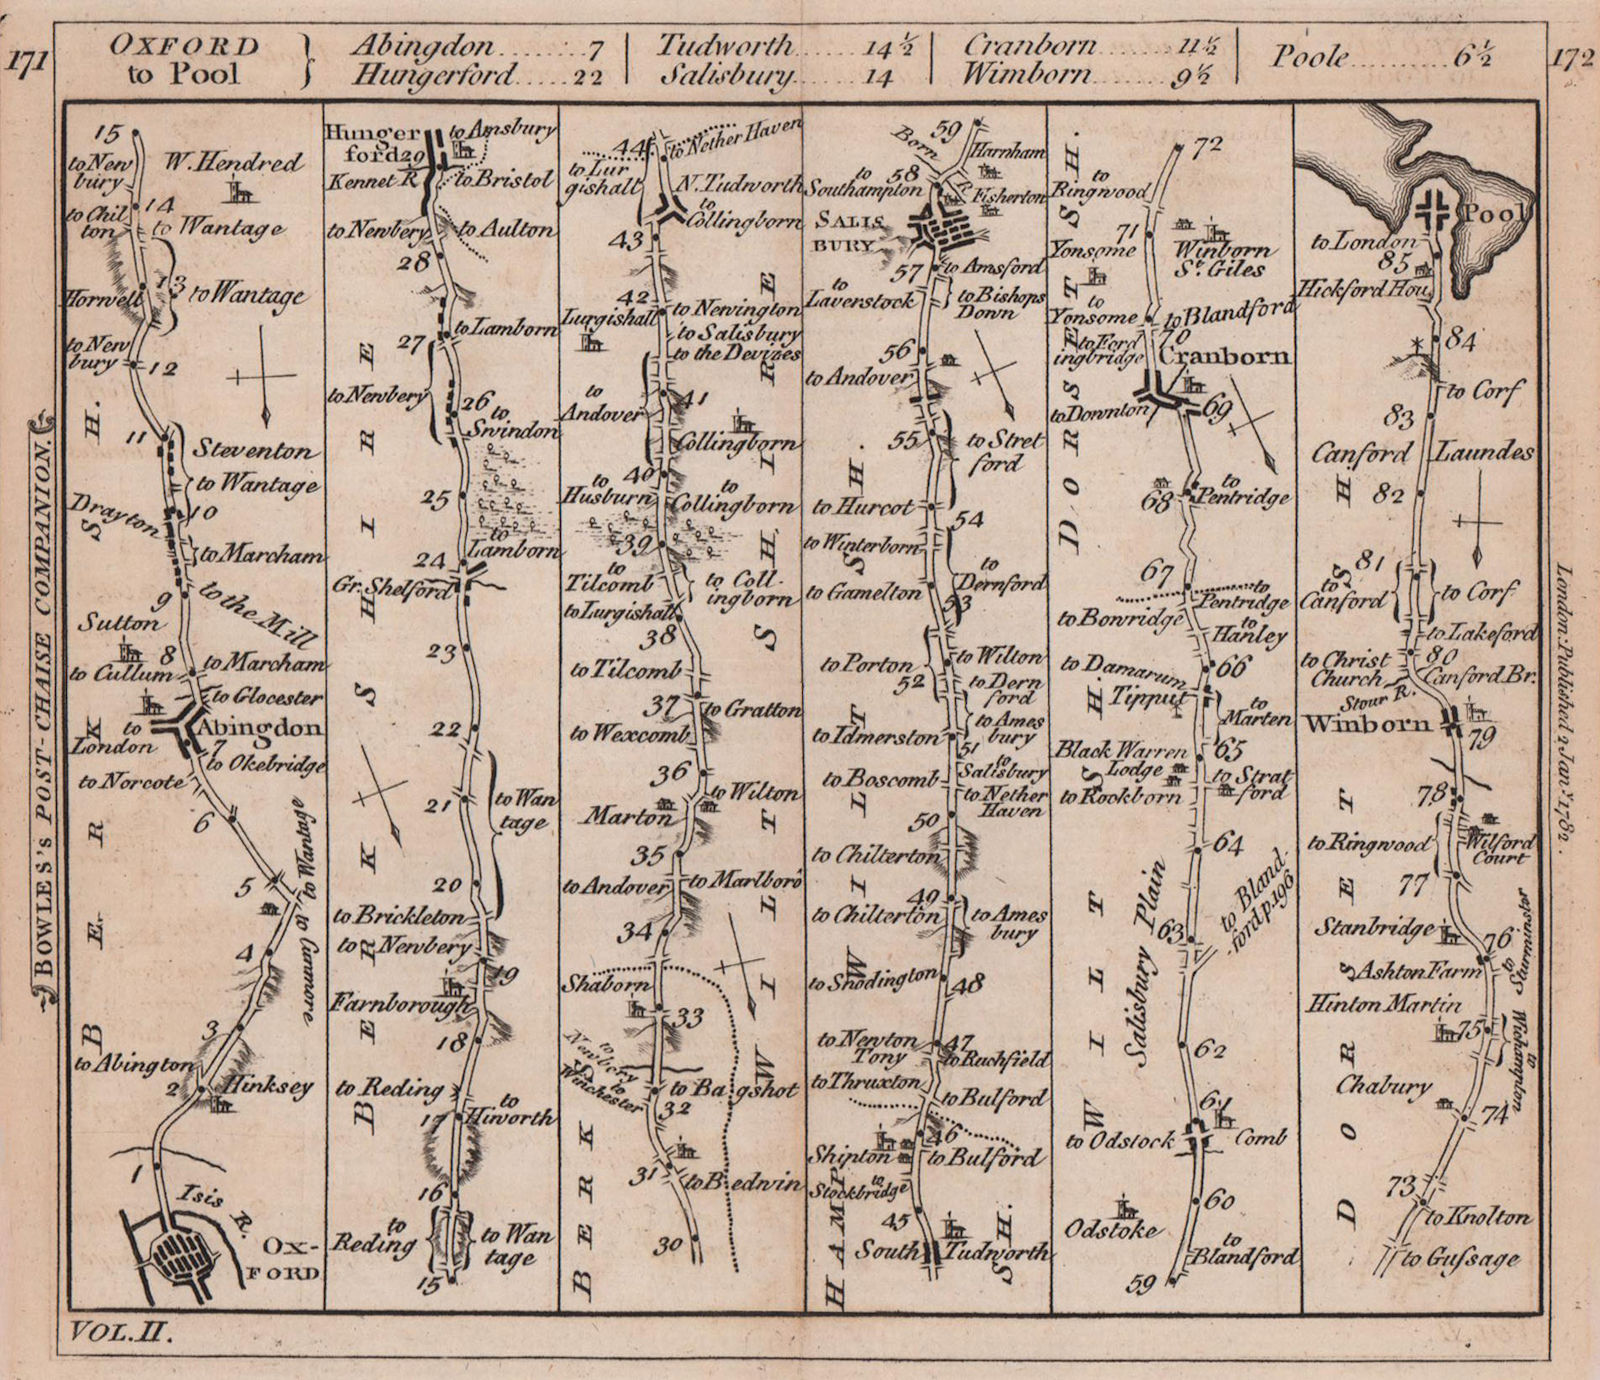 Associate Product Oxford-Abingdon-Hungerford-Salisbury-Poole road strip map. BOWLES 1782 old